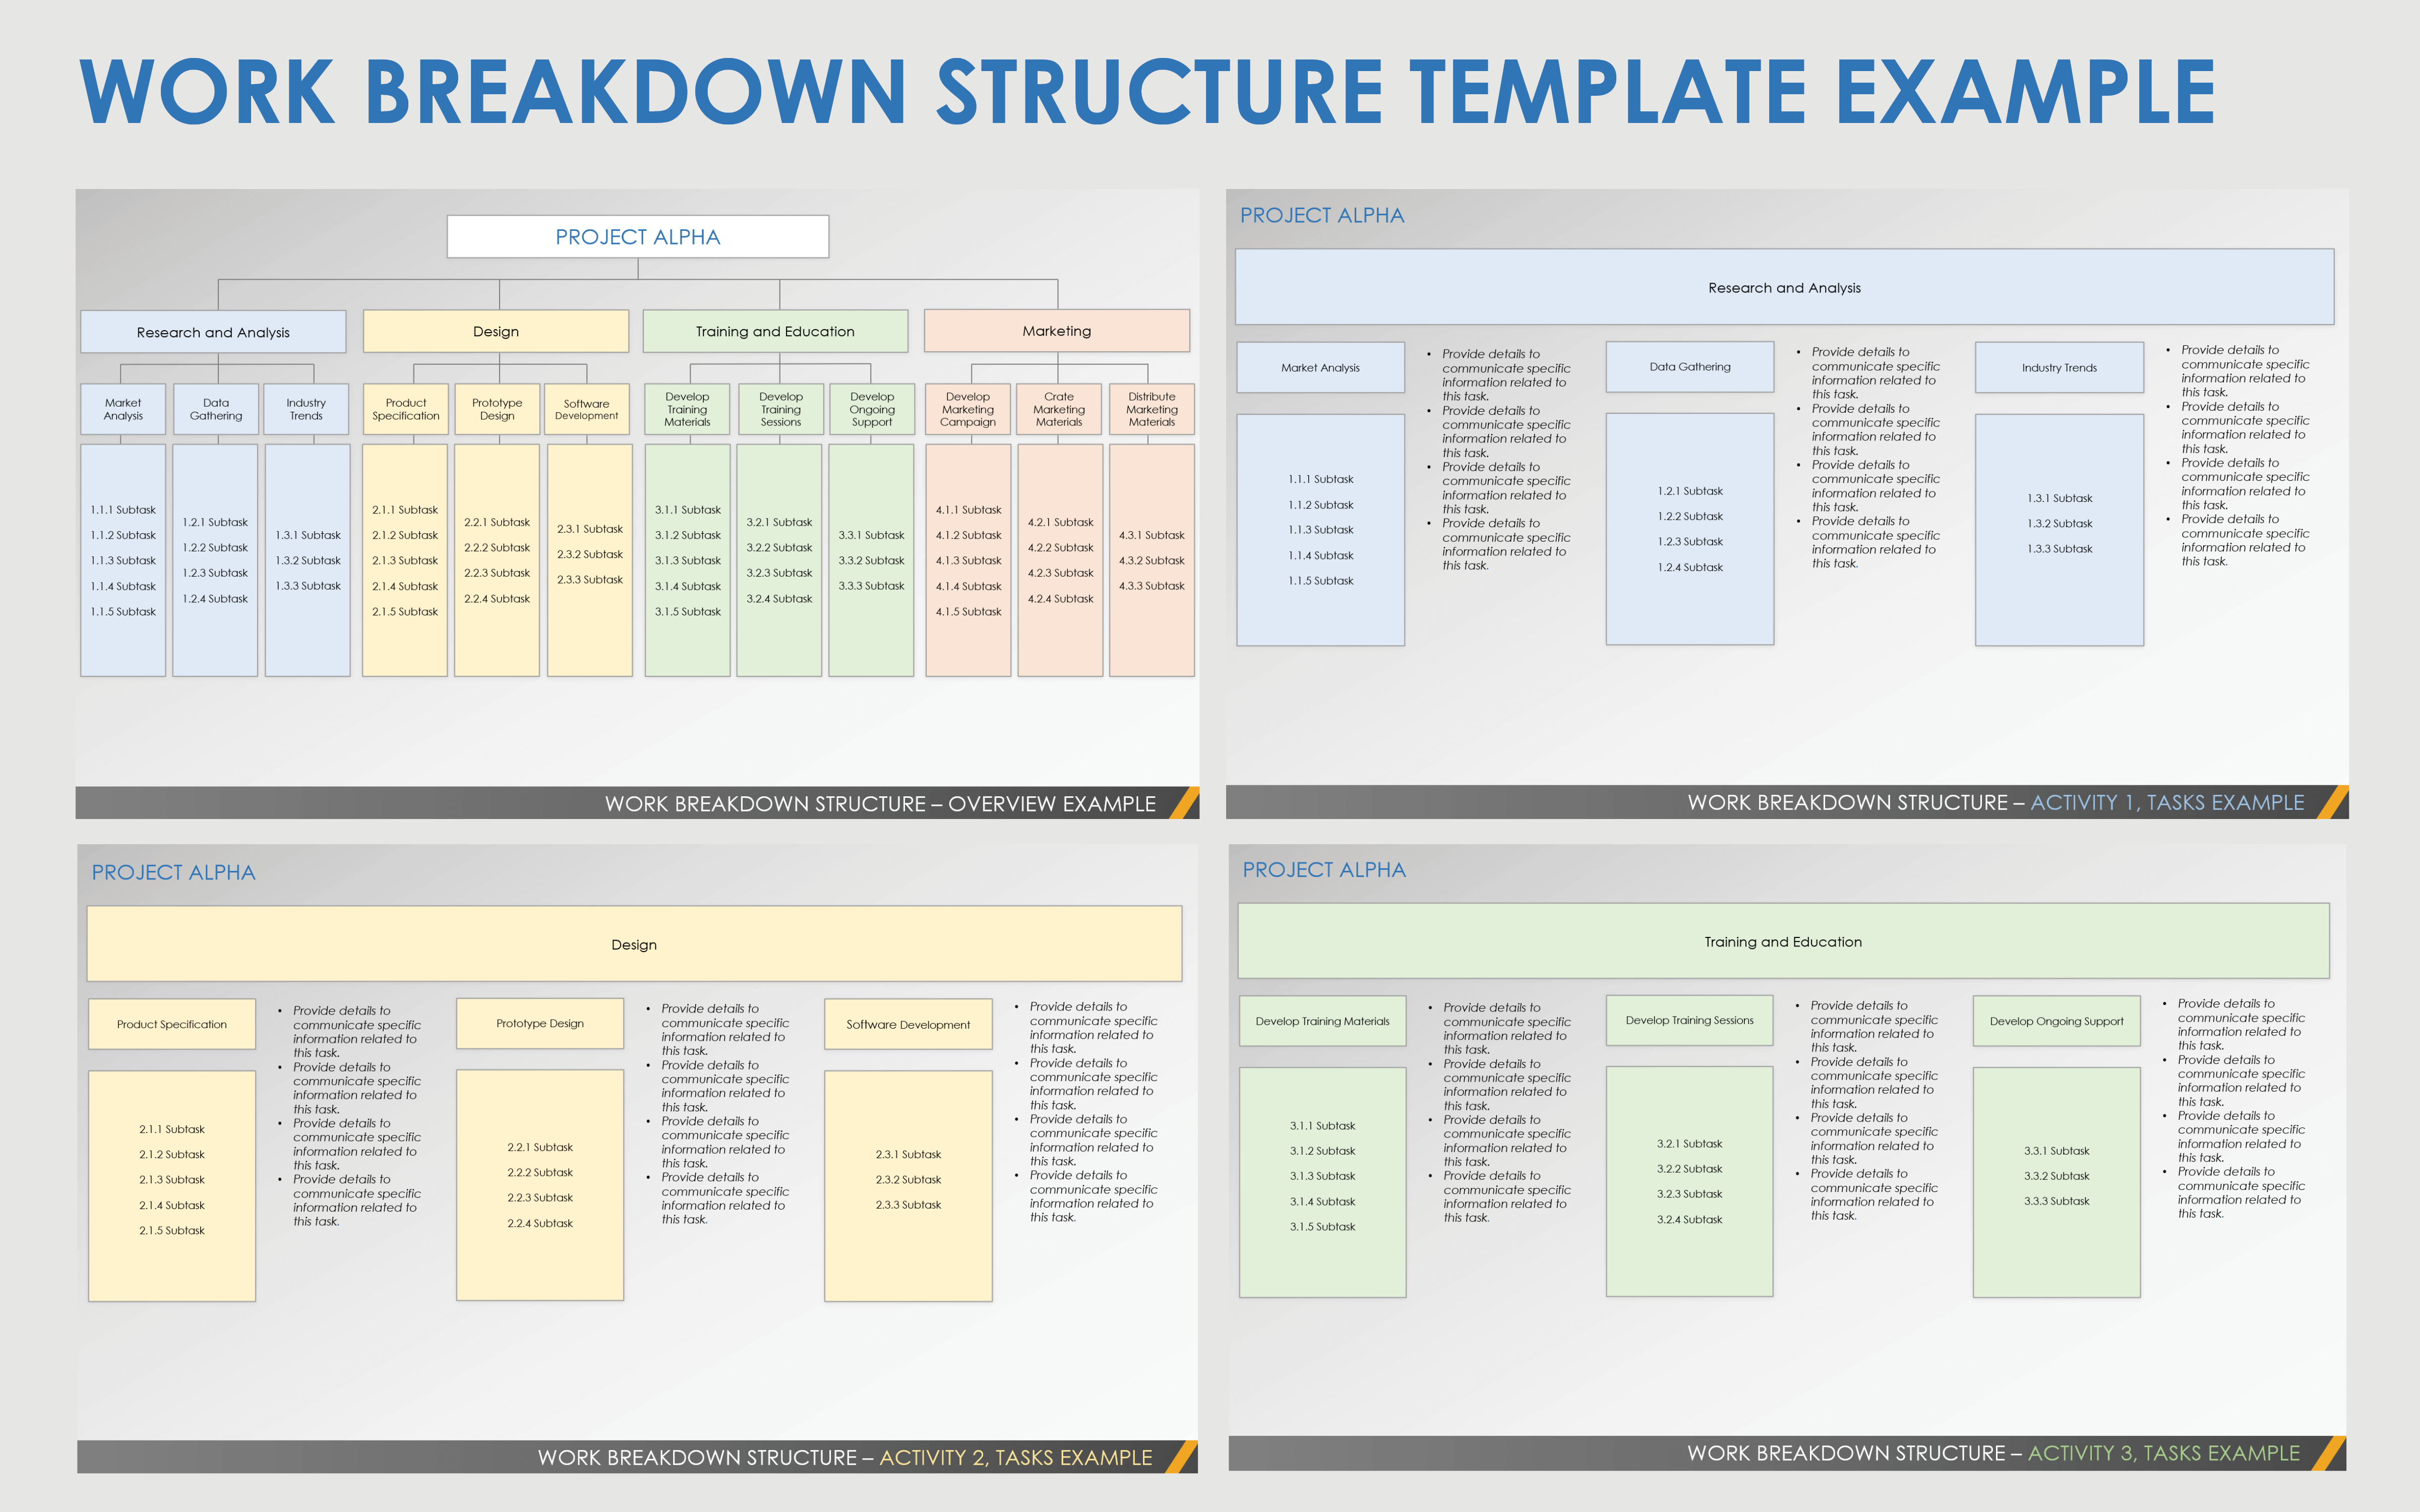 Work Breakdown Structure Template Example PowerPoint